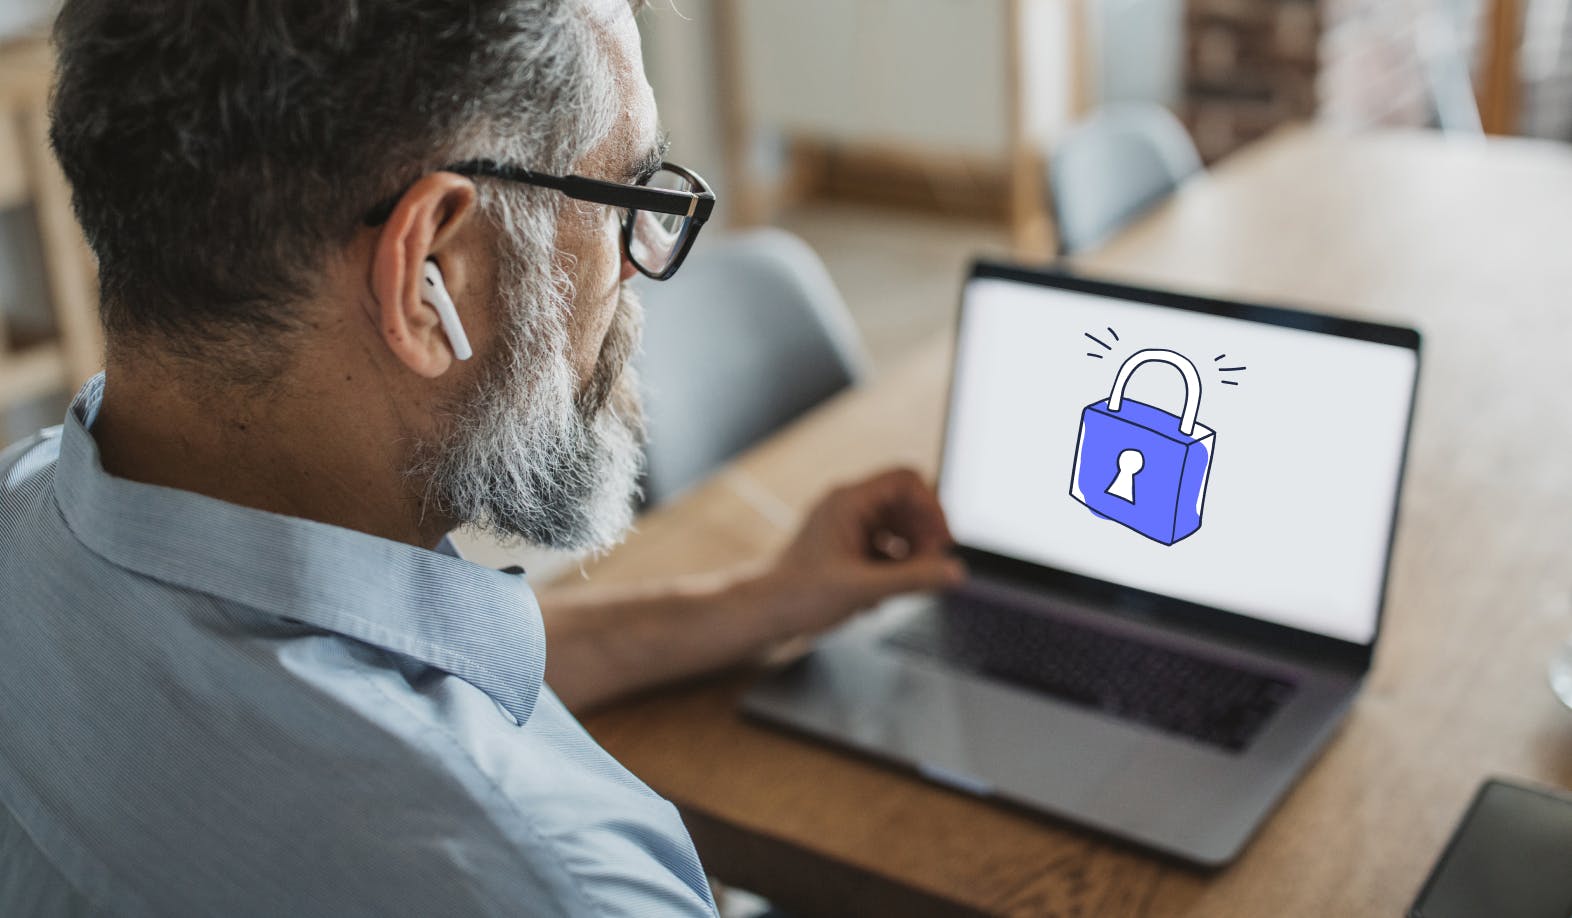 blogpost-image of a man looking at his laptop screen with an illustrated lock